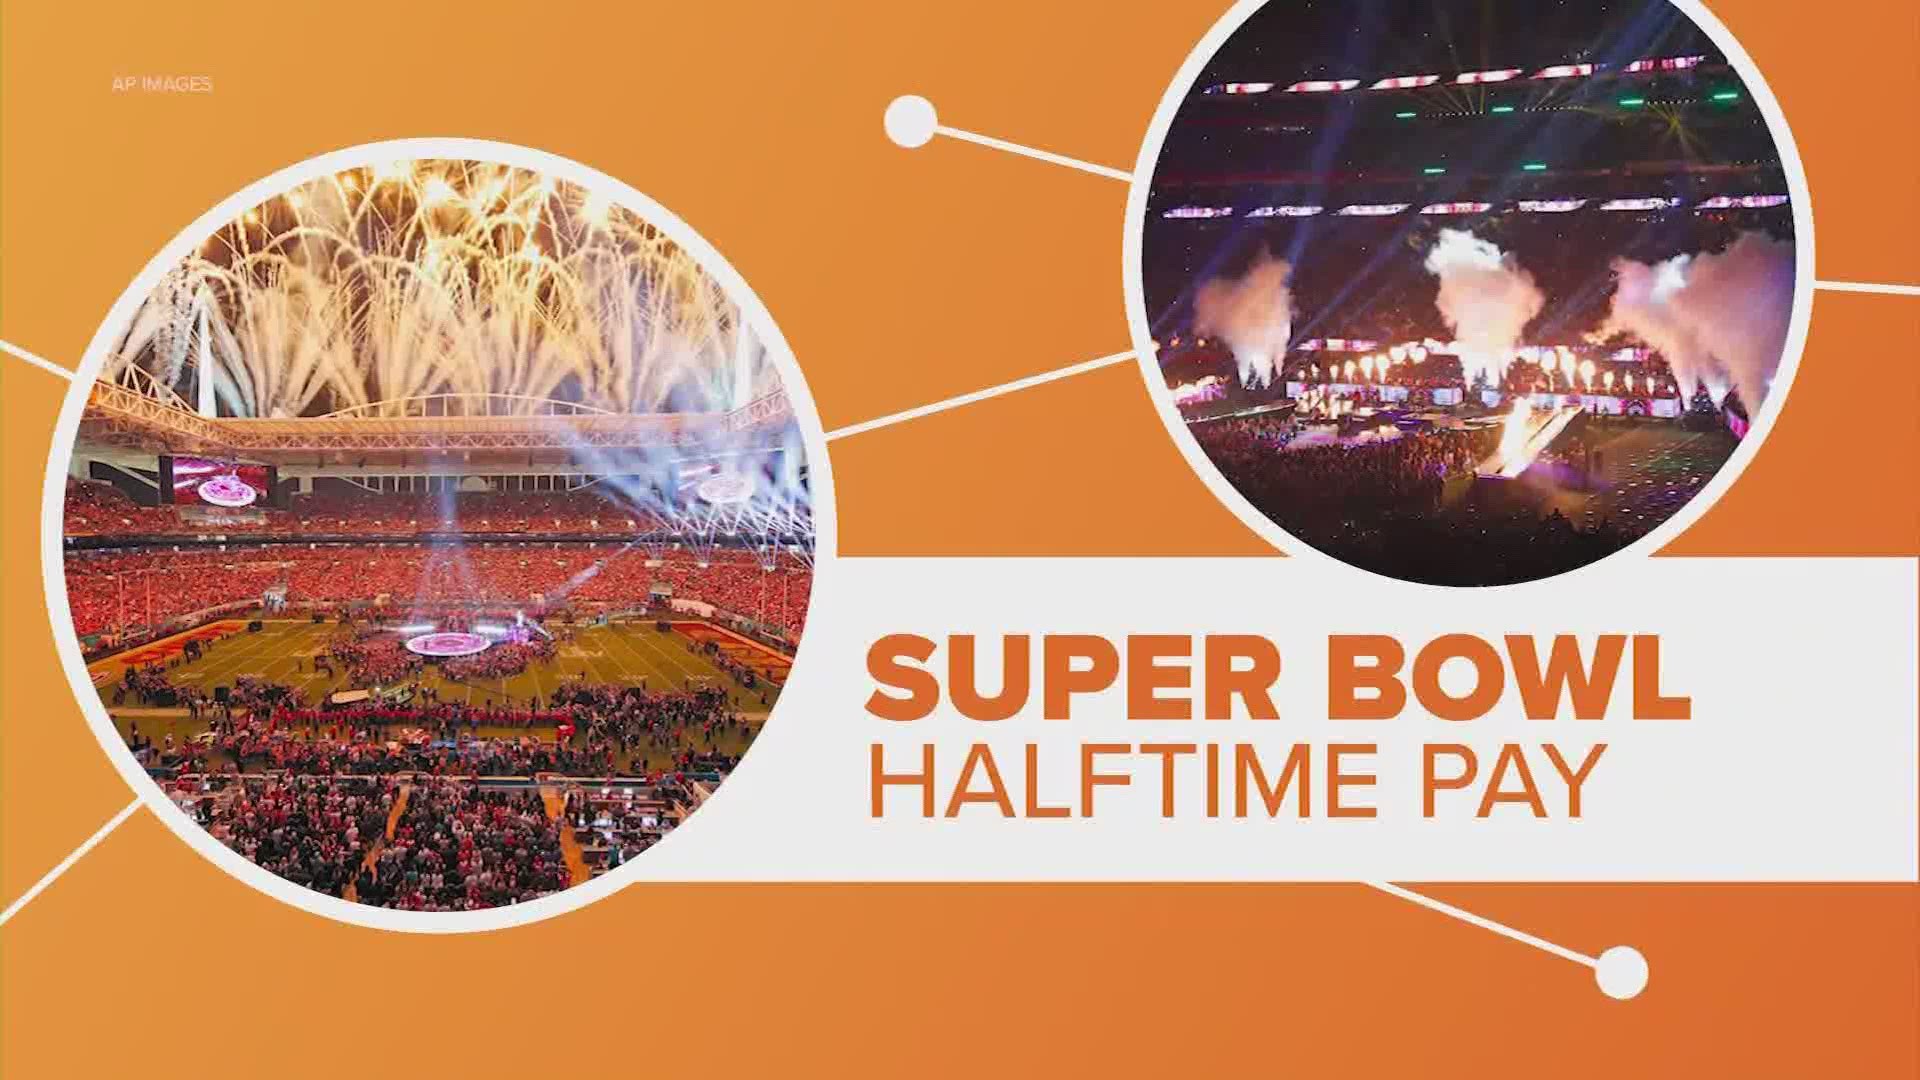 The paycheck for Super Bowl performers is non-existent but the payoff is big. Let's connect the dots.